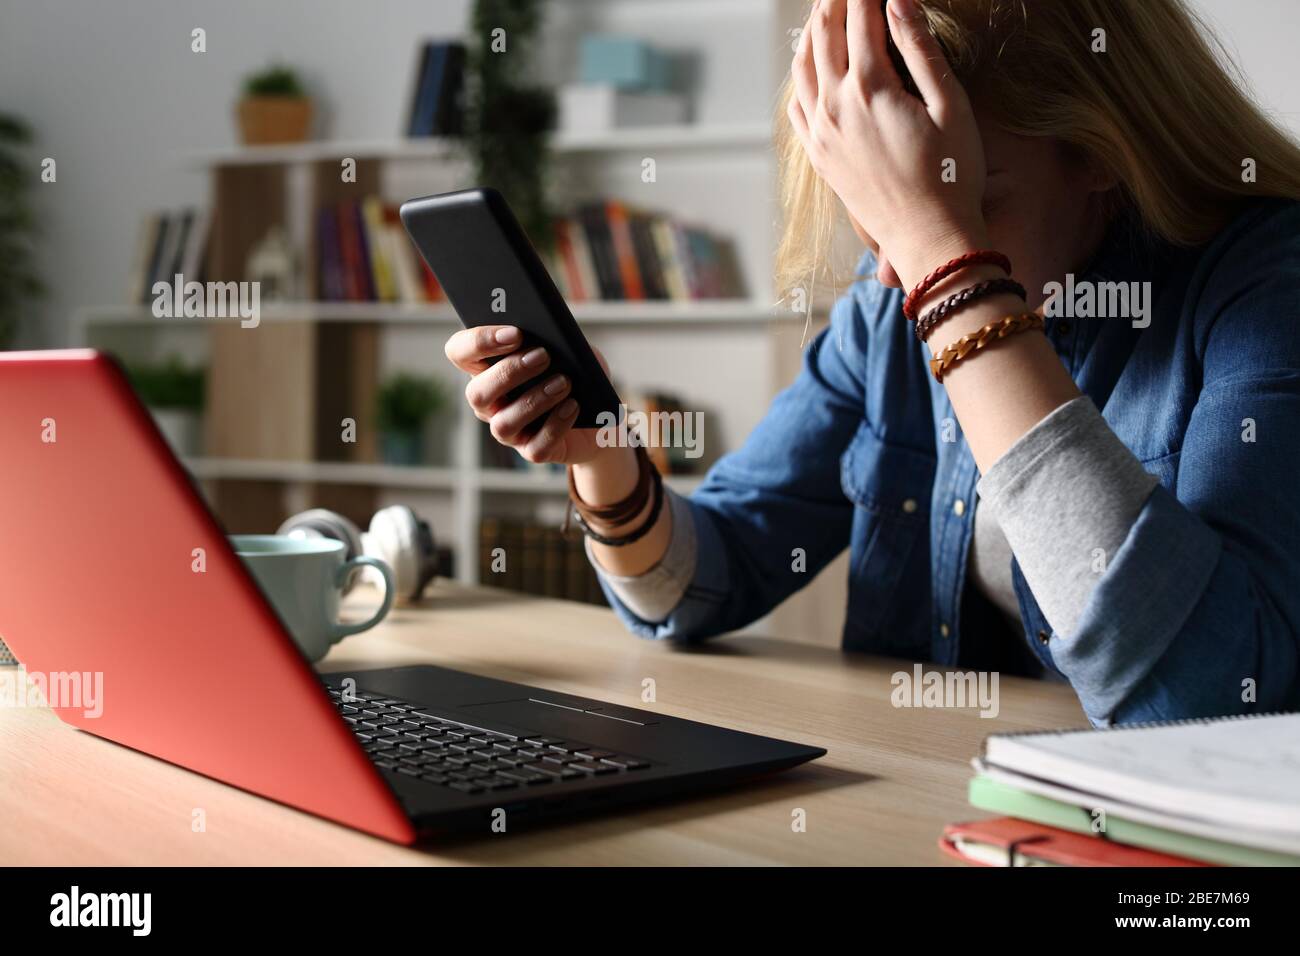 Close up of sad student reading bad news on smart phone sitting on a desk at home at night Stock Photo